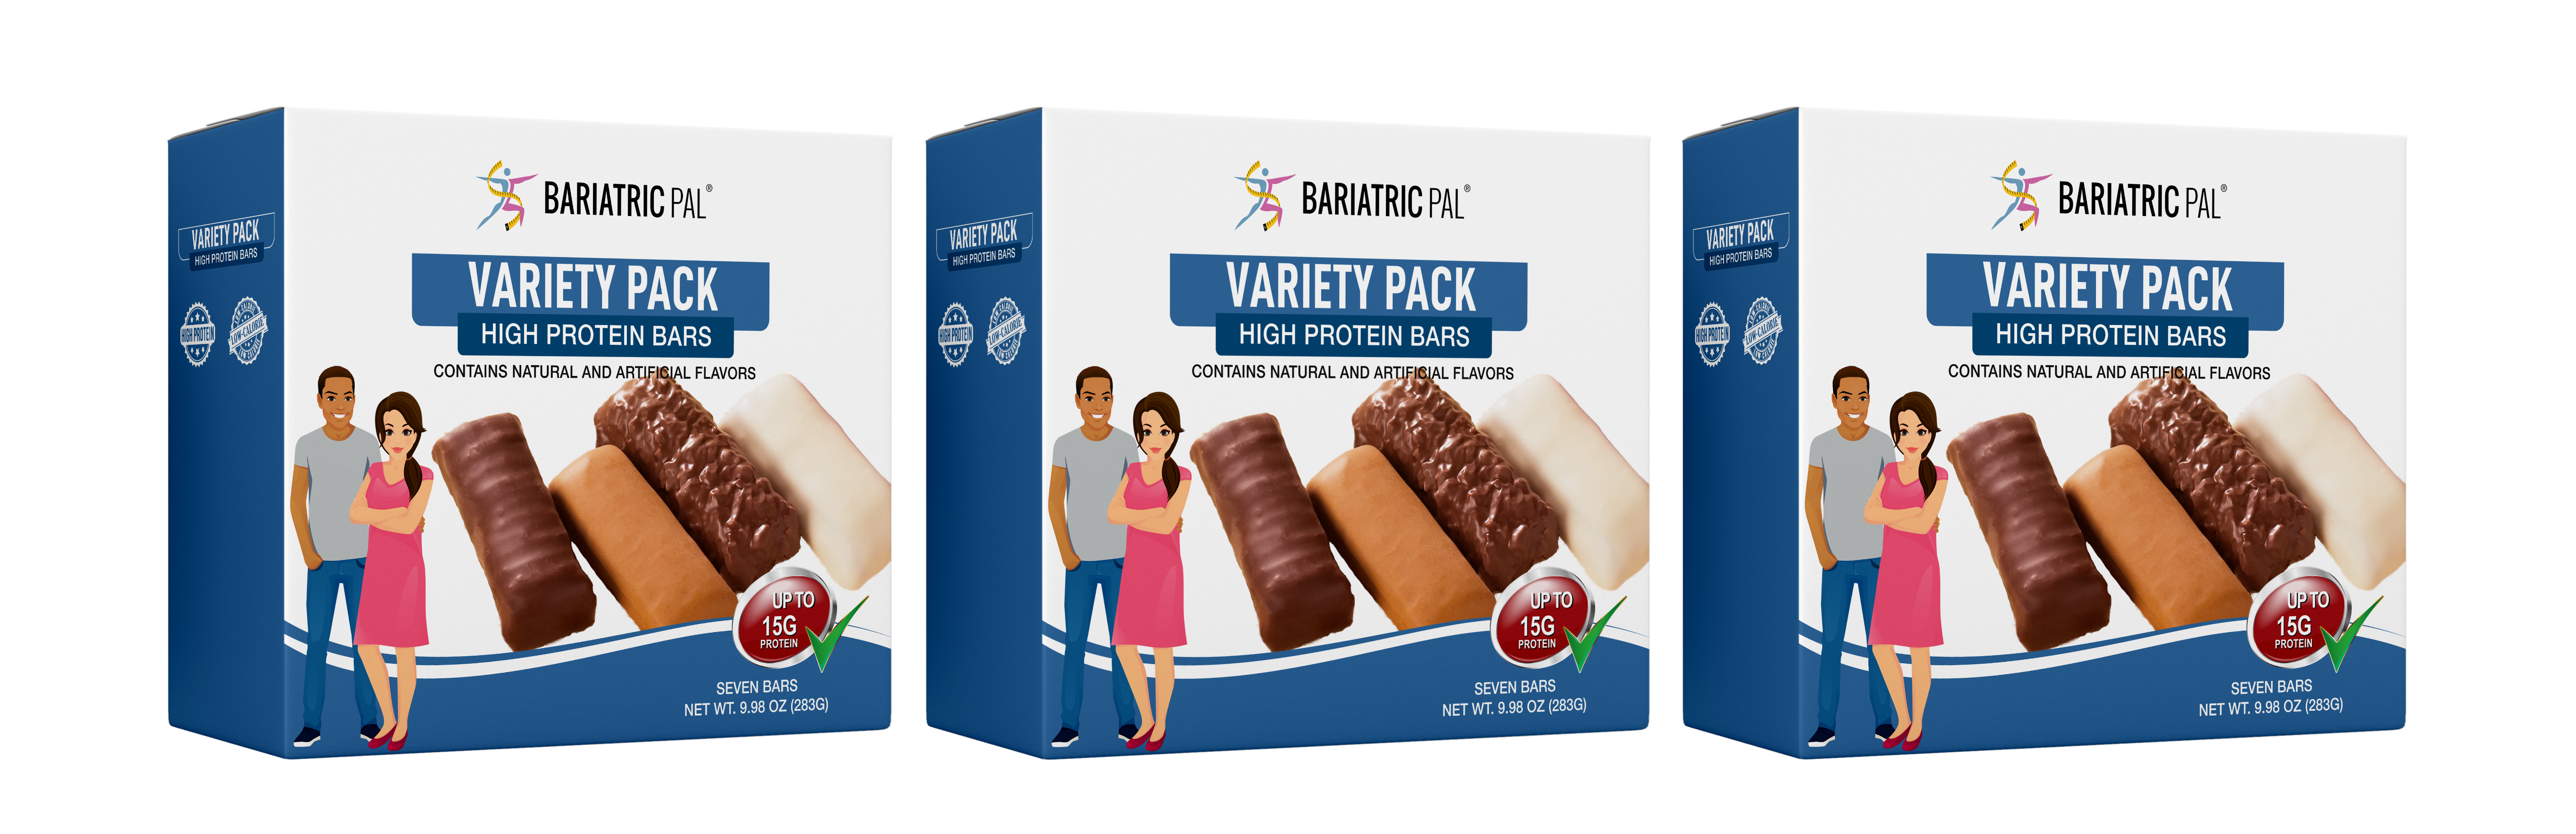 BariatricPal High Protein Bars - Variety Pack - High-quality Protein Bars by BariatricPal at 